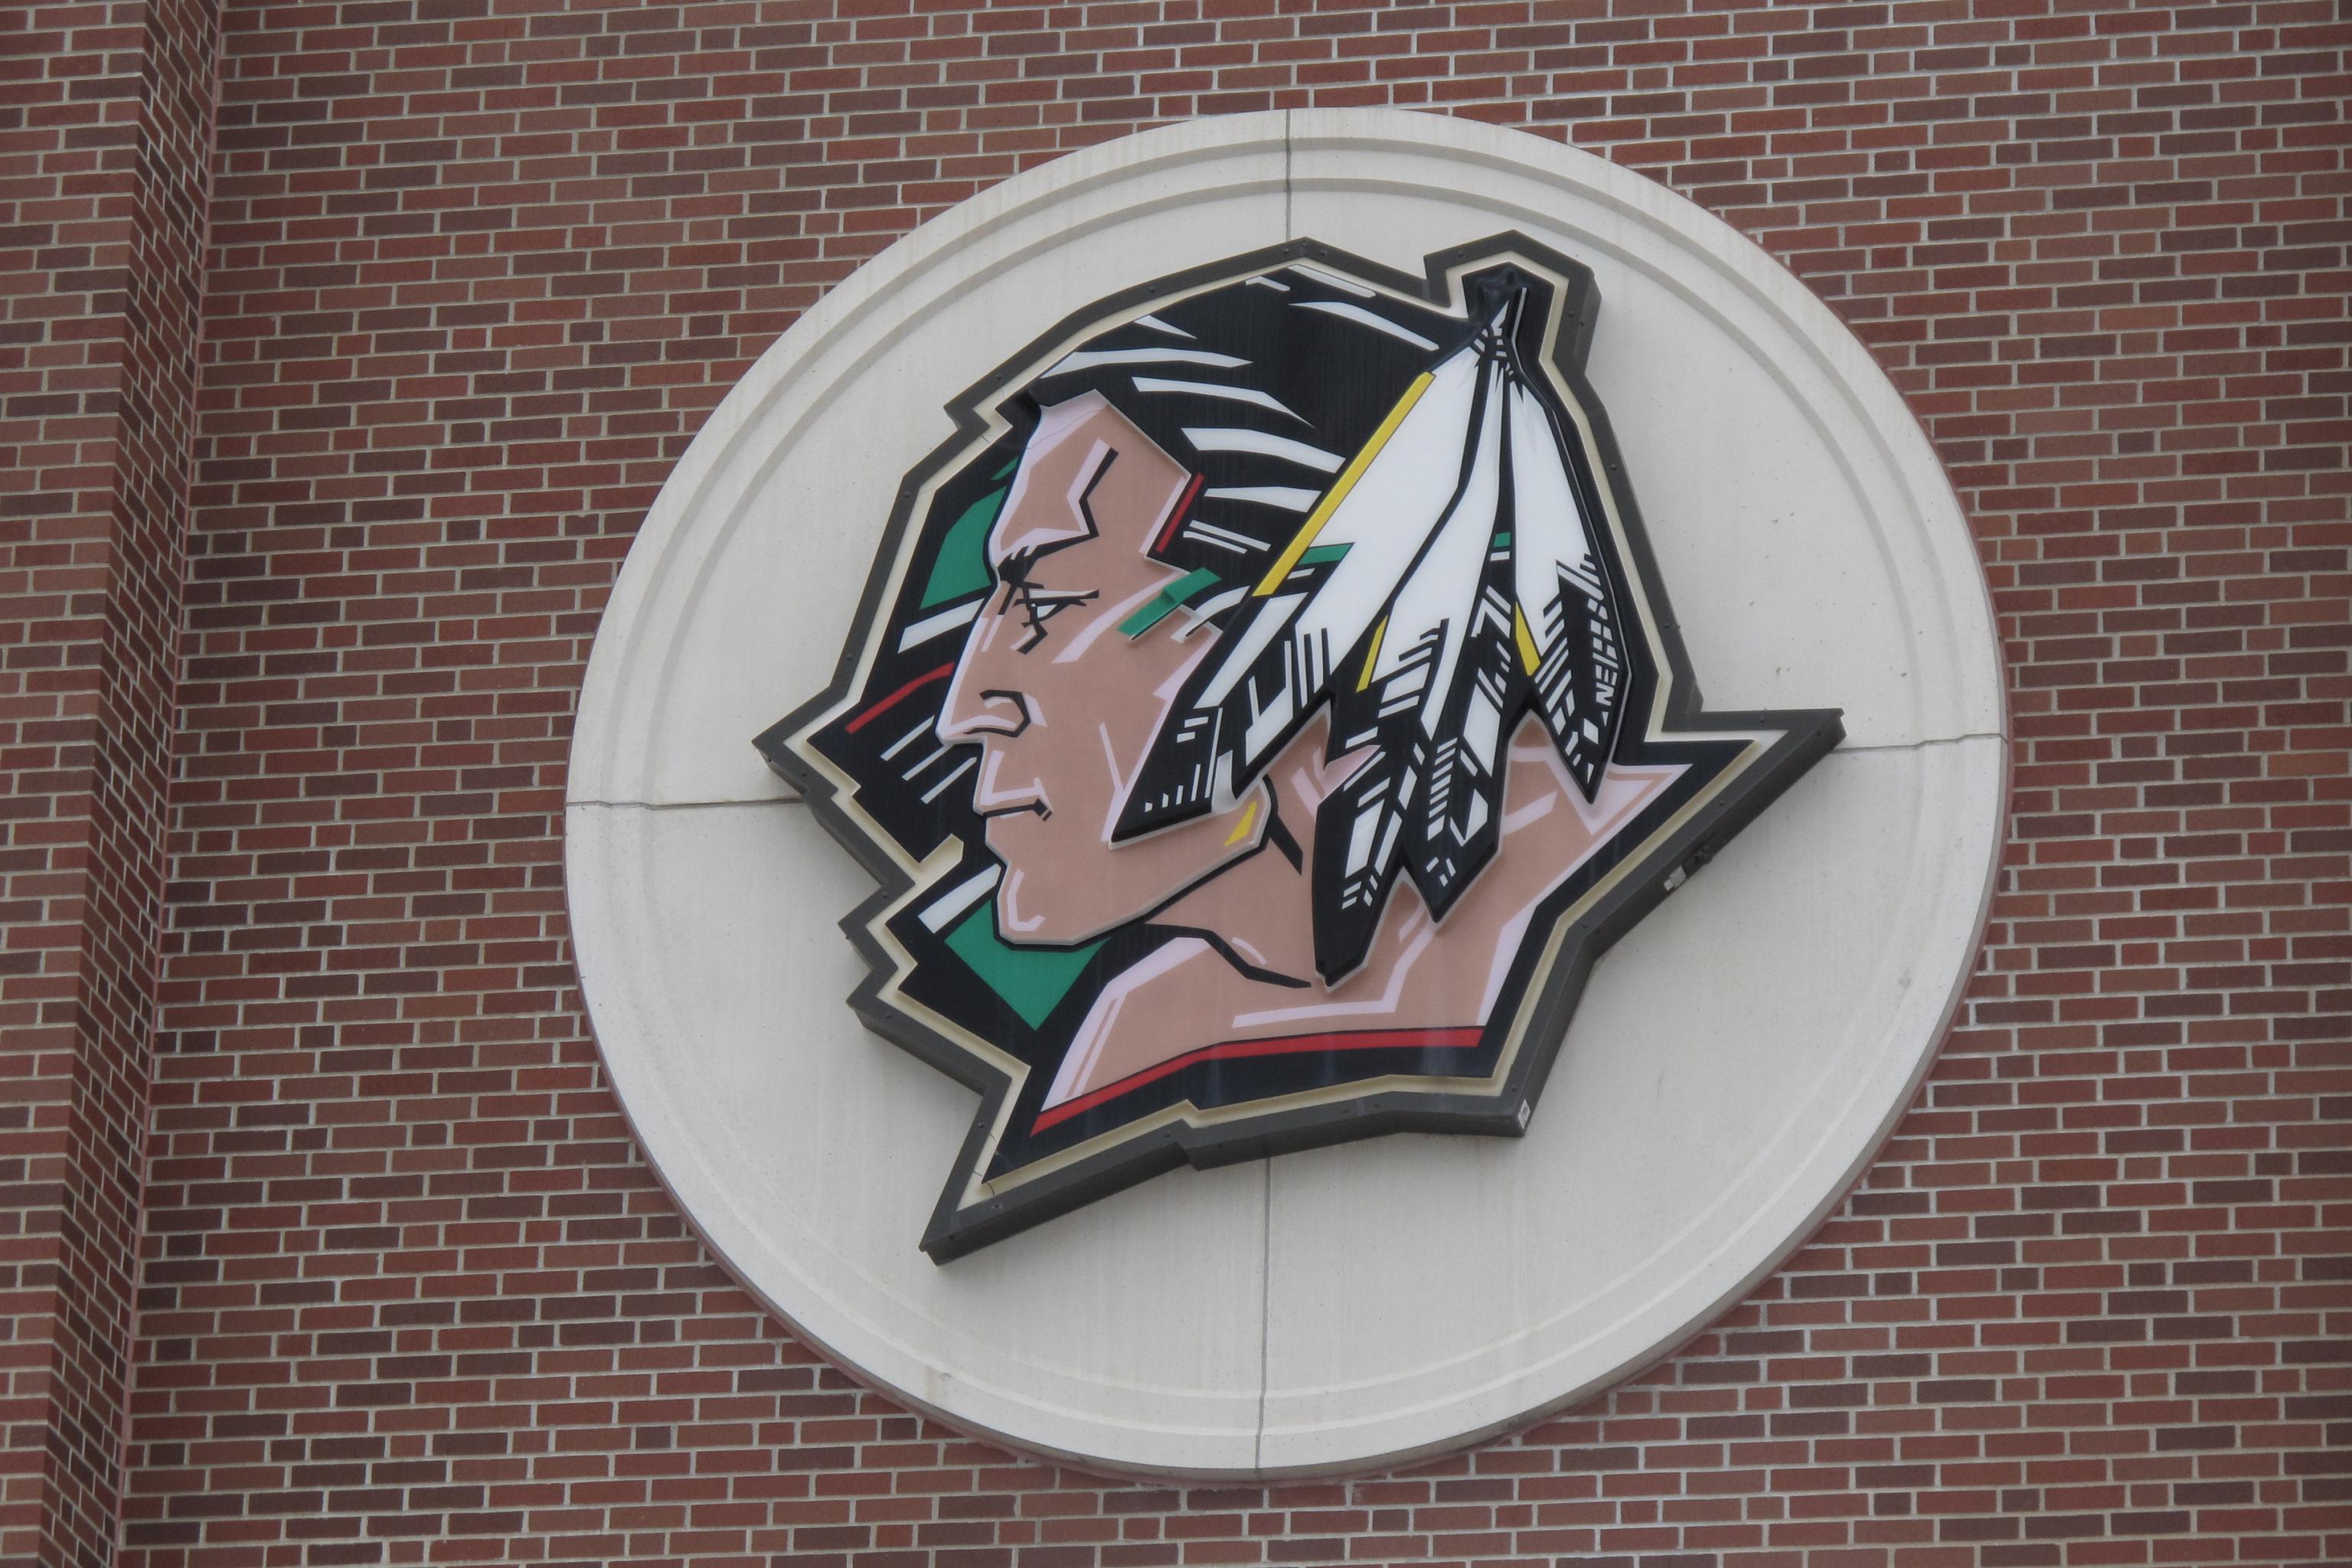 North Dakota Needs a Nickname (And No, 'Fighting Sioux' Won't Do